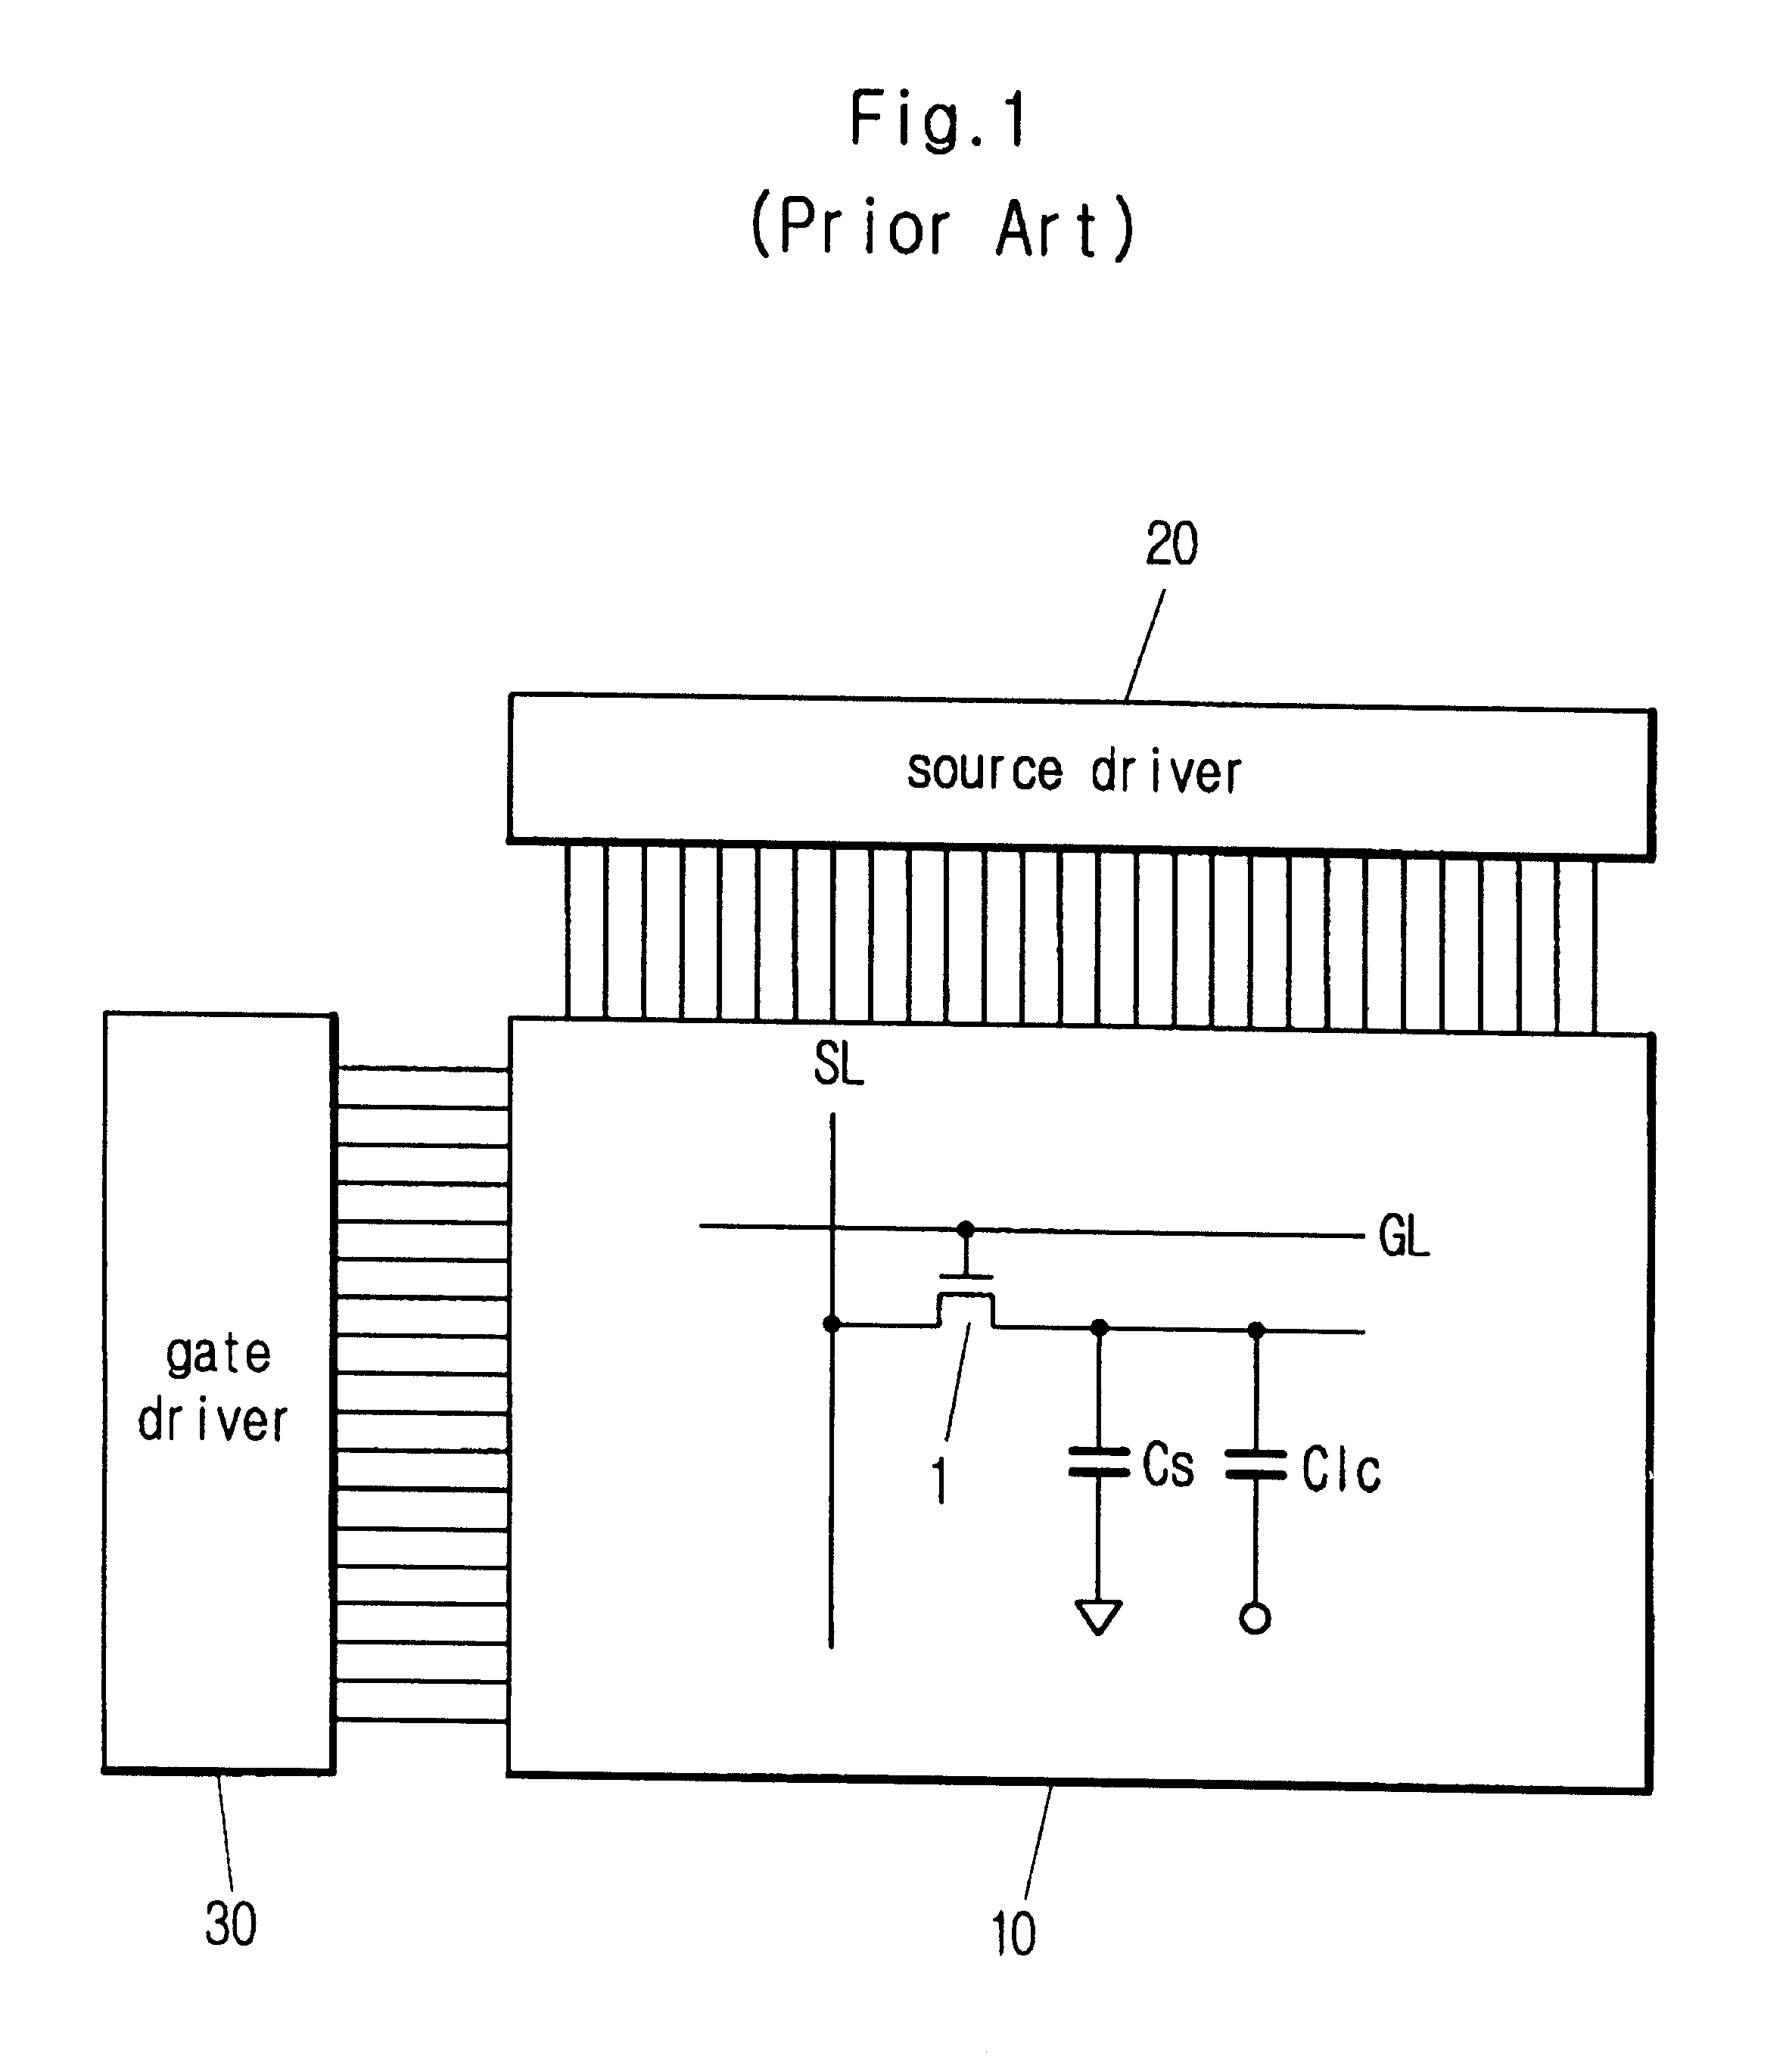 Circuit for driving source of liquid crystal display